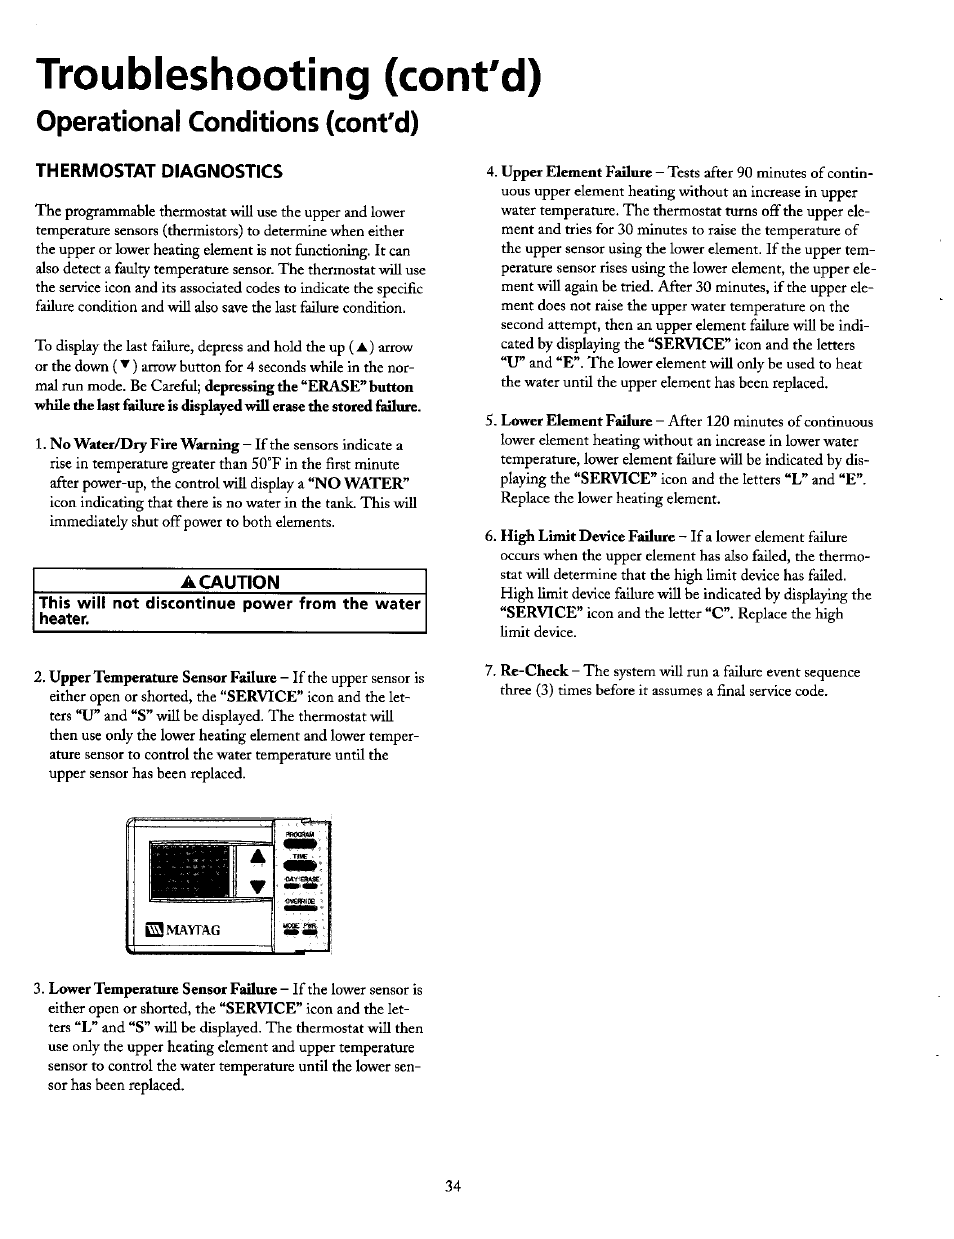 Troubleshooting (cont'd), Operational conditions (cont'd), Thermostat diagnostics | A caution | Maytag HE21250PC User Manual | Page 34 / 40